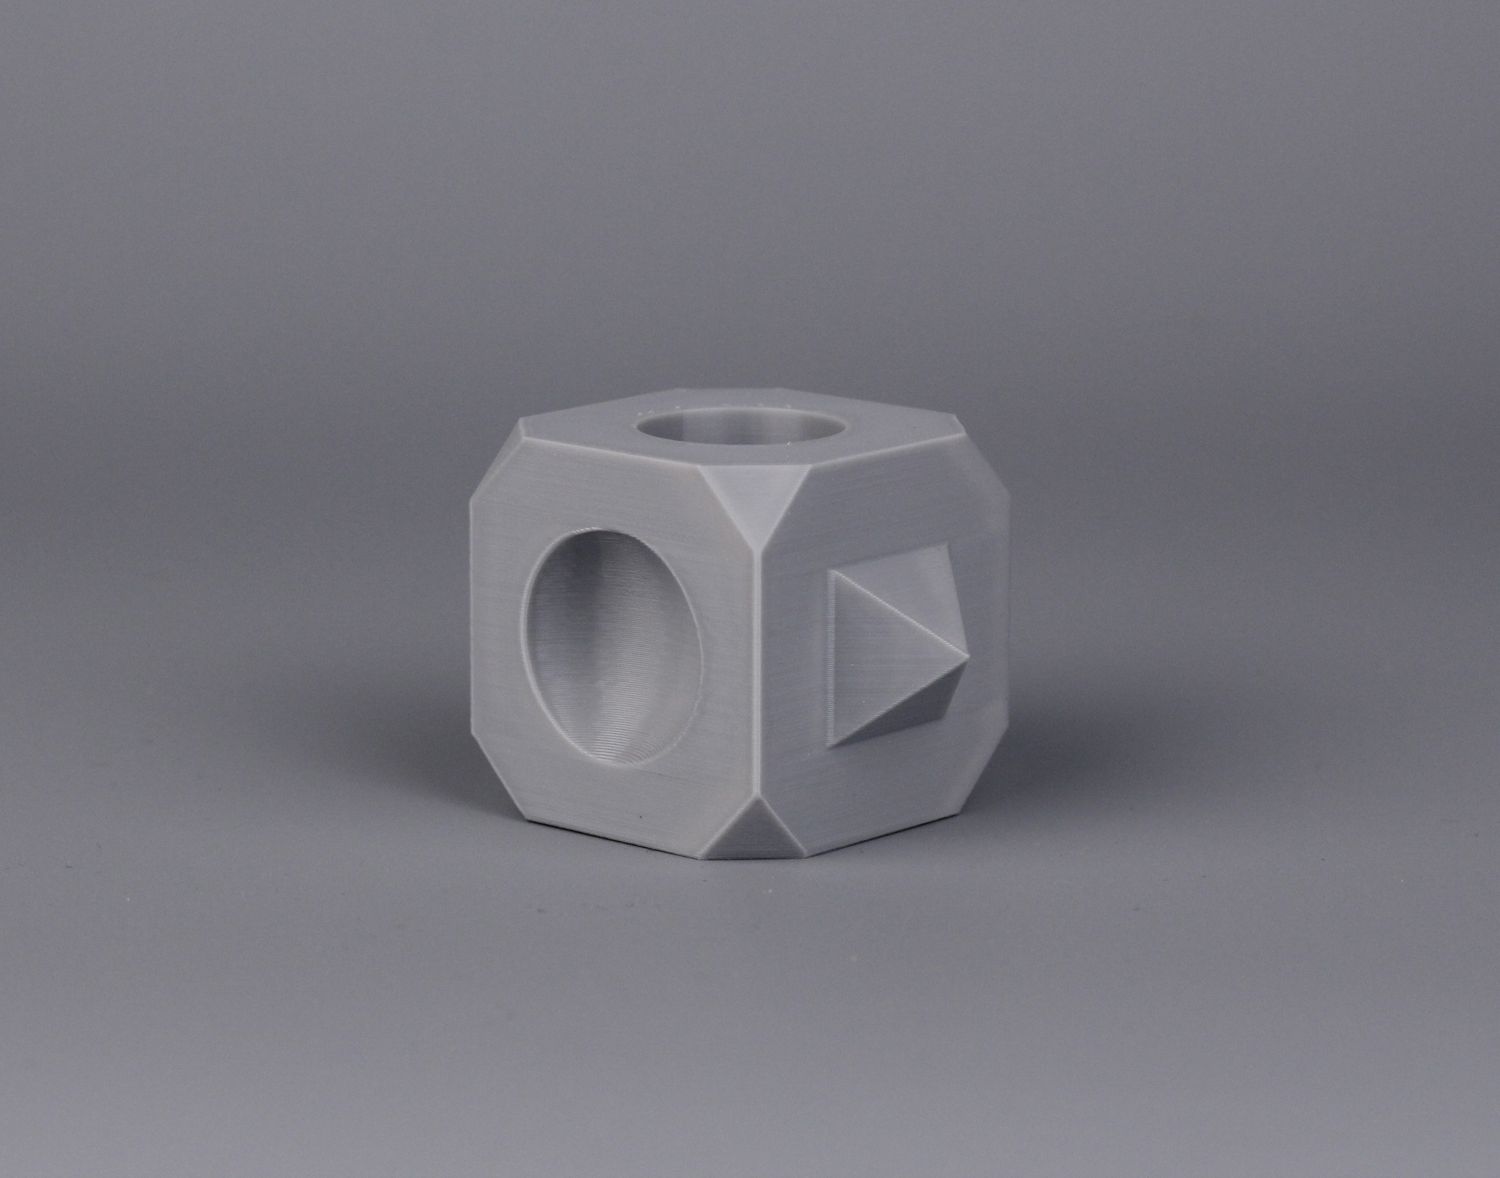 Calibration Cube Creality K12 | Creality K1 Review: CoreXY for Tinkerers